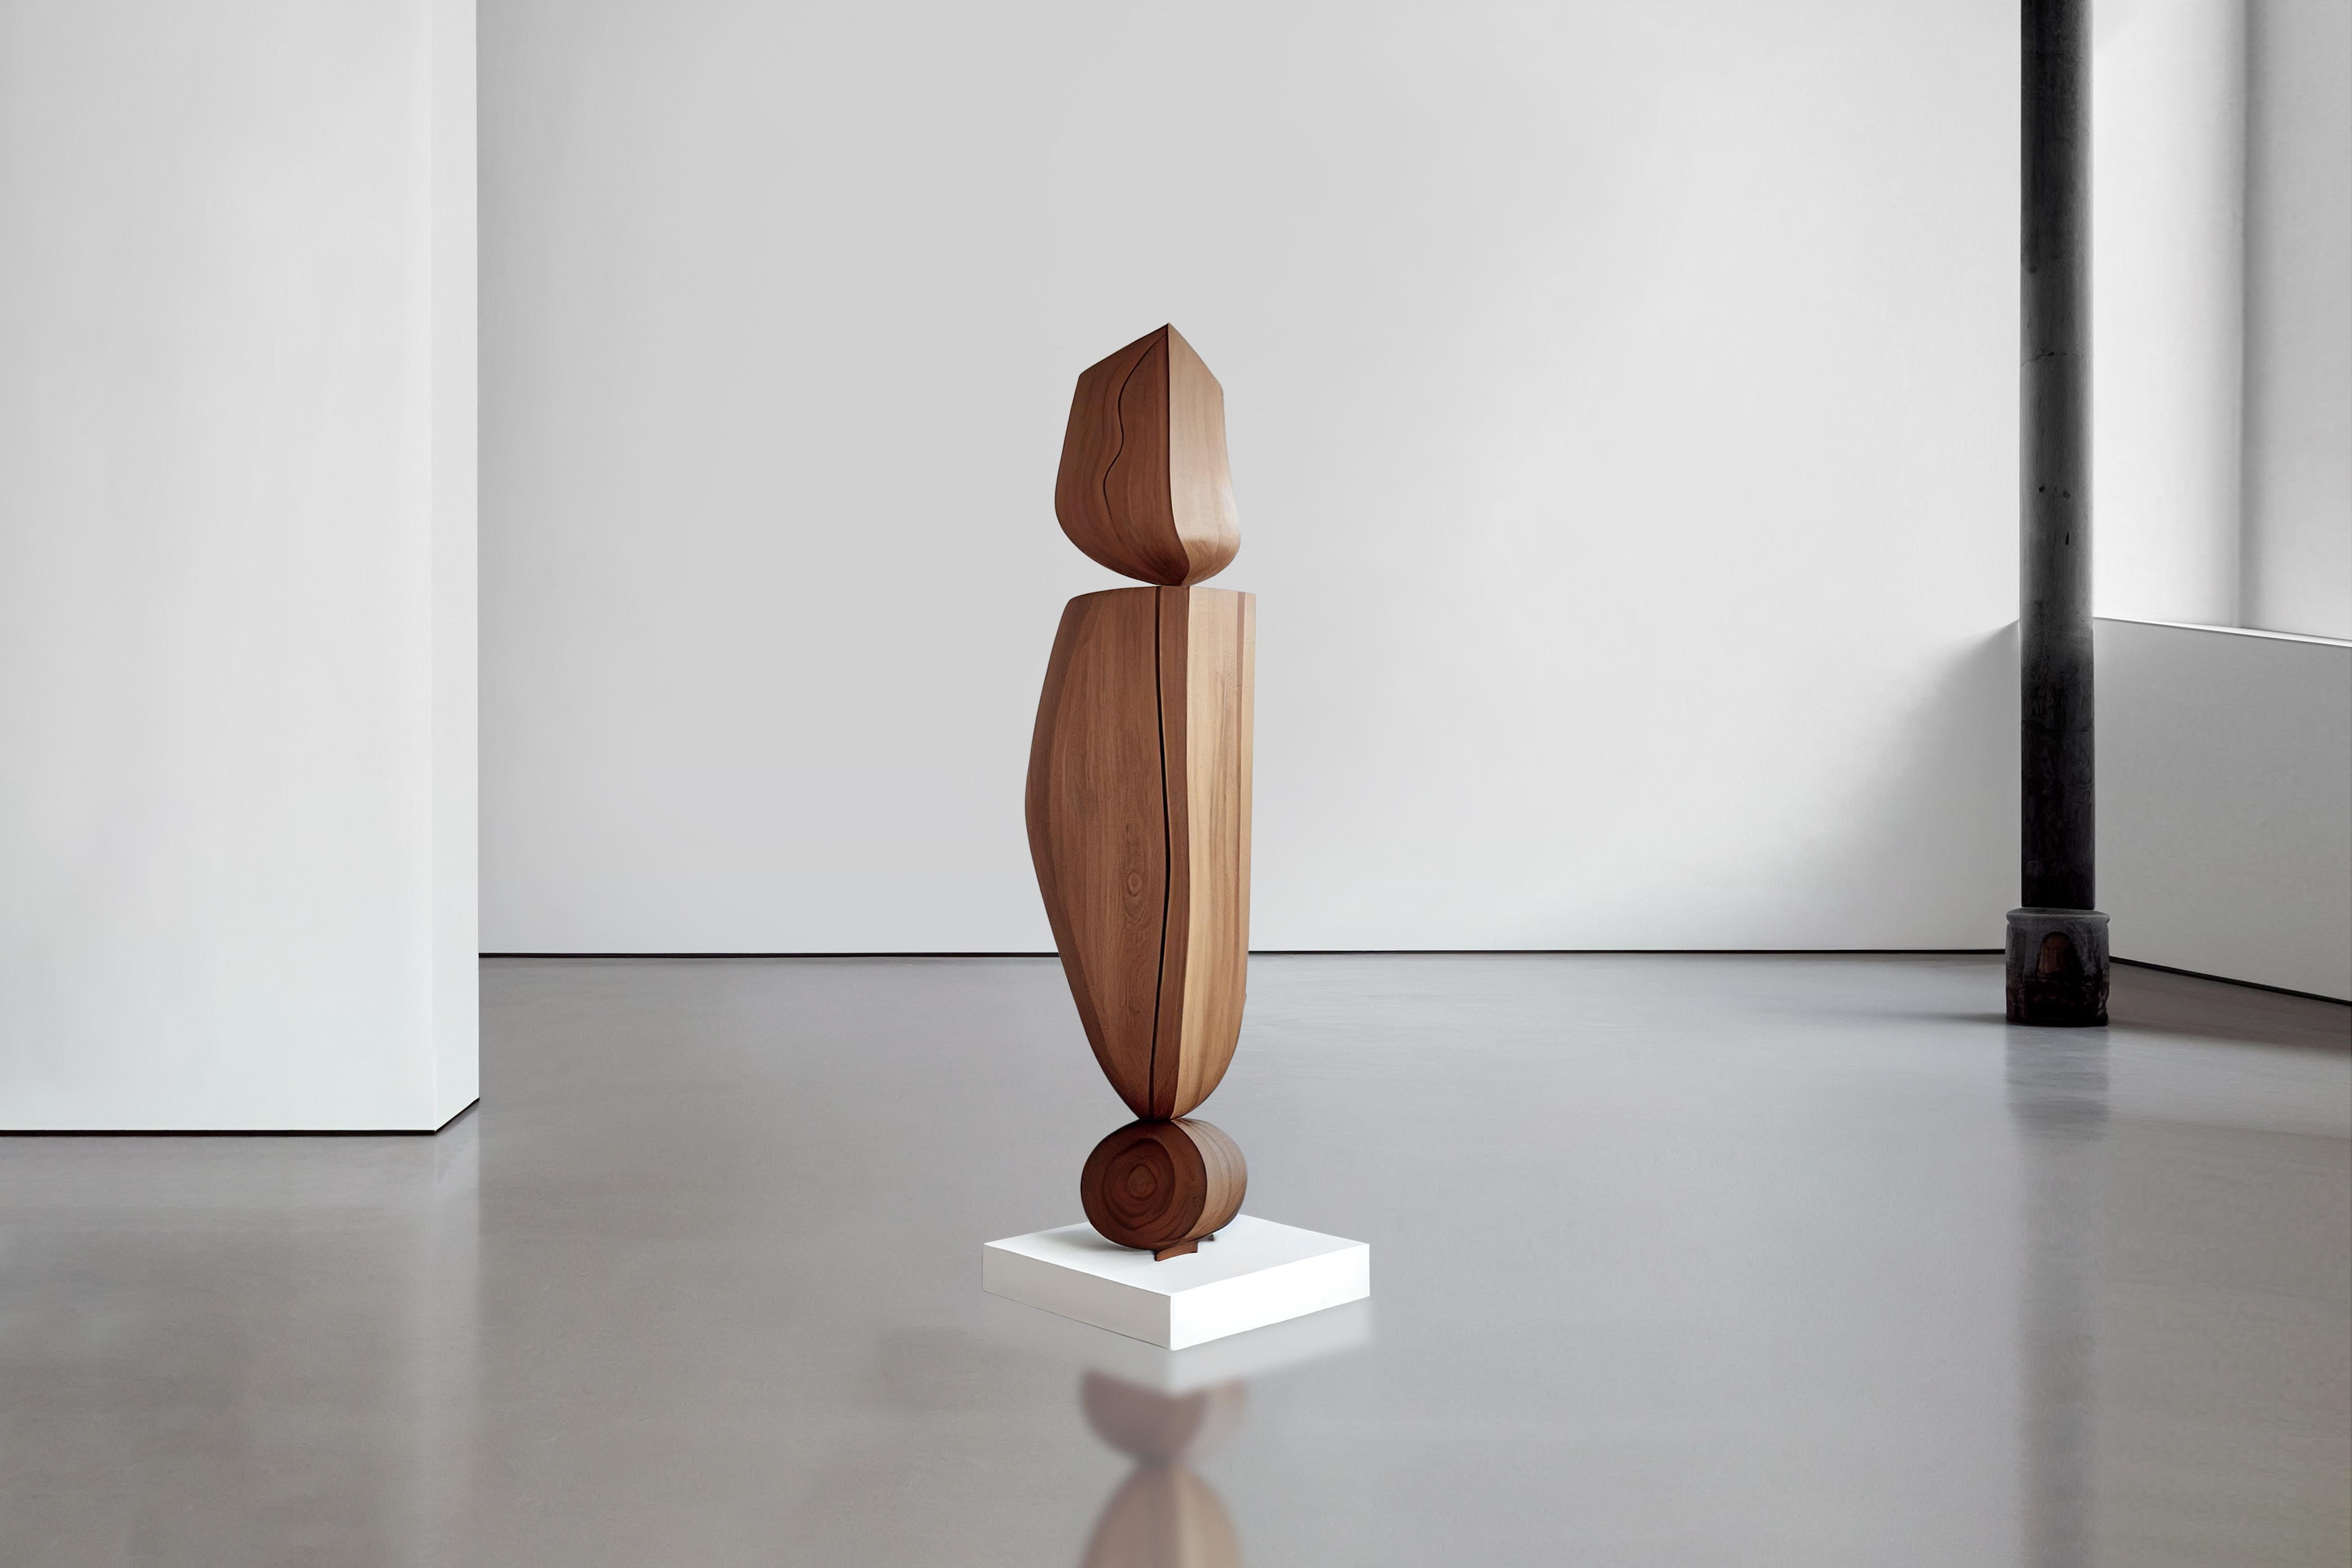 “Still stand” sculptures by Joel Escalona.

Joel Escalona's wooden standing sculptures are objects of raw beauty and serene grace. Each one is a testament to the power of the material, with smooth curves that flow into one another, inviting the